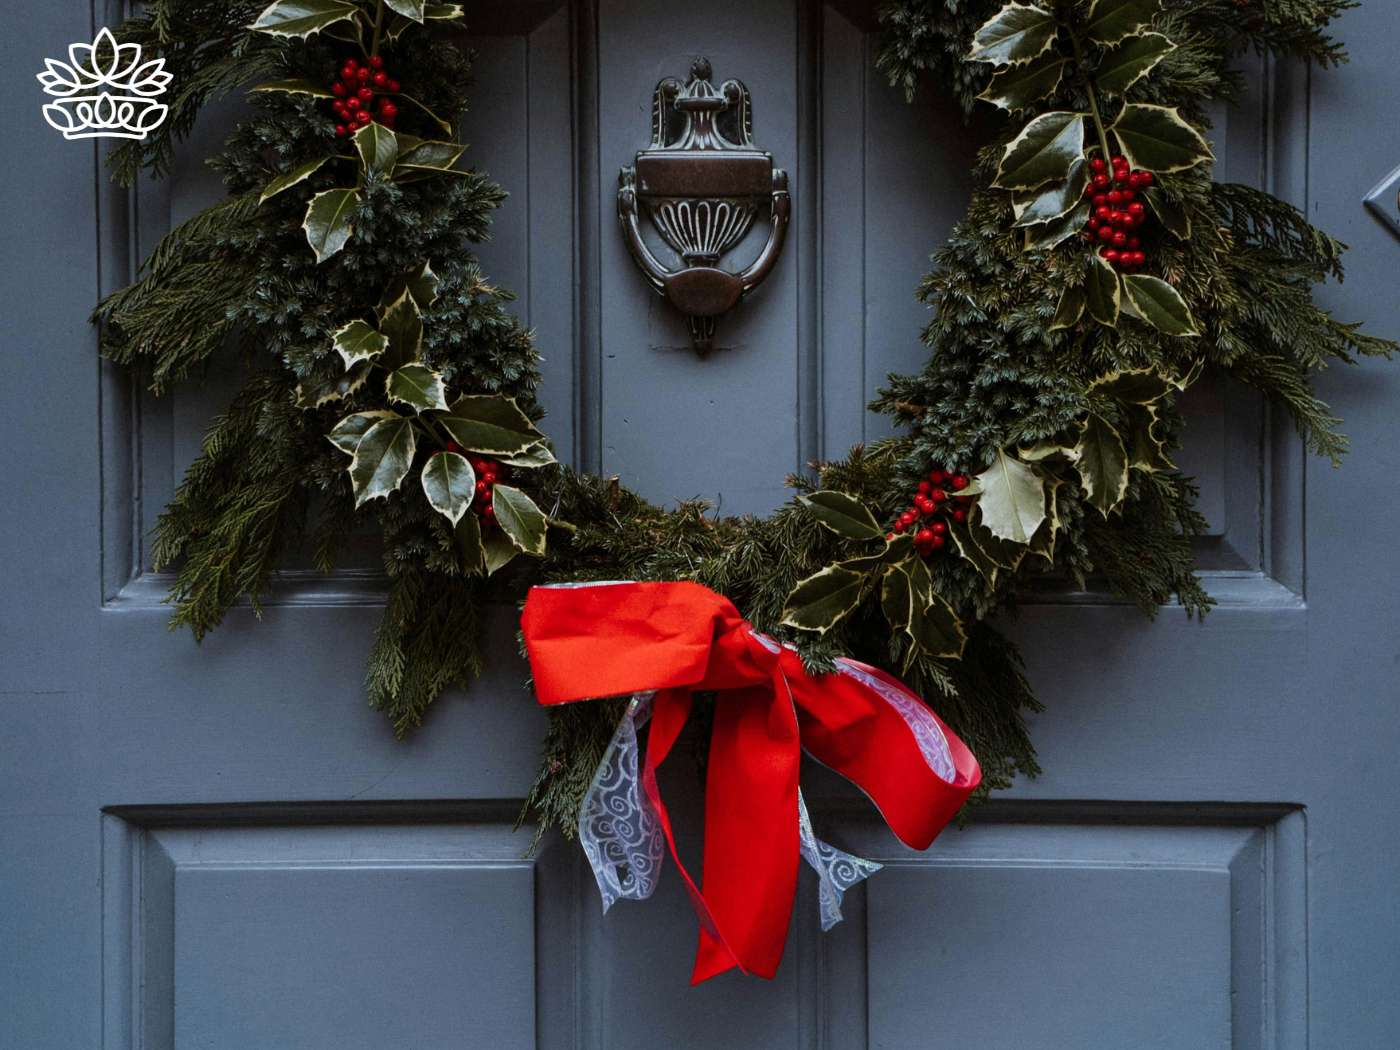 Elegant Christmas wreath form with lush greenery, holly berries, and a vibrant red bow adorning a front door, complete with festive ornaments, part of a classic holiday arrangement collection at Fabulous Flowers and Gifts.